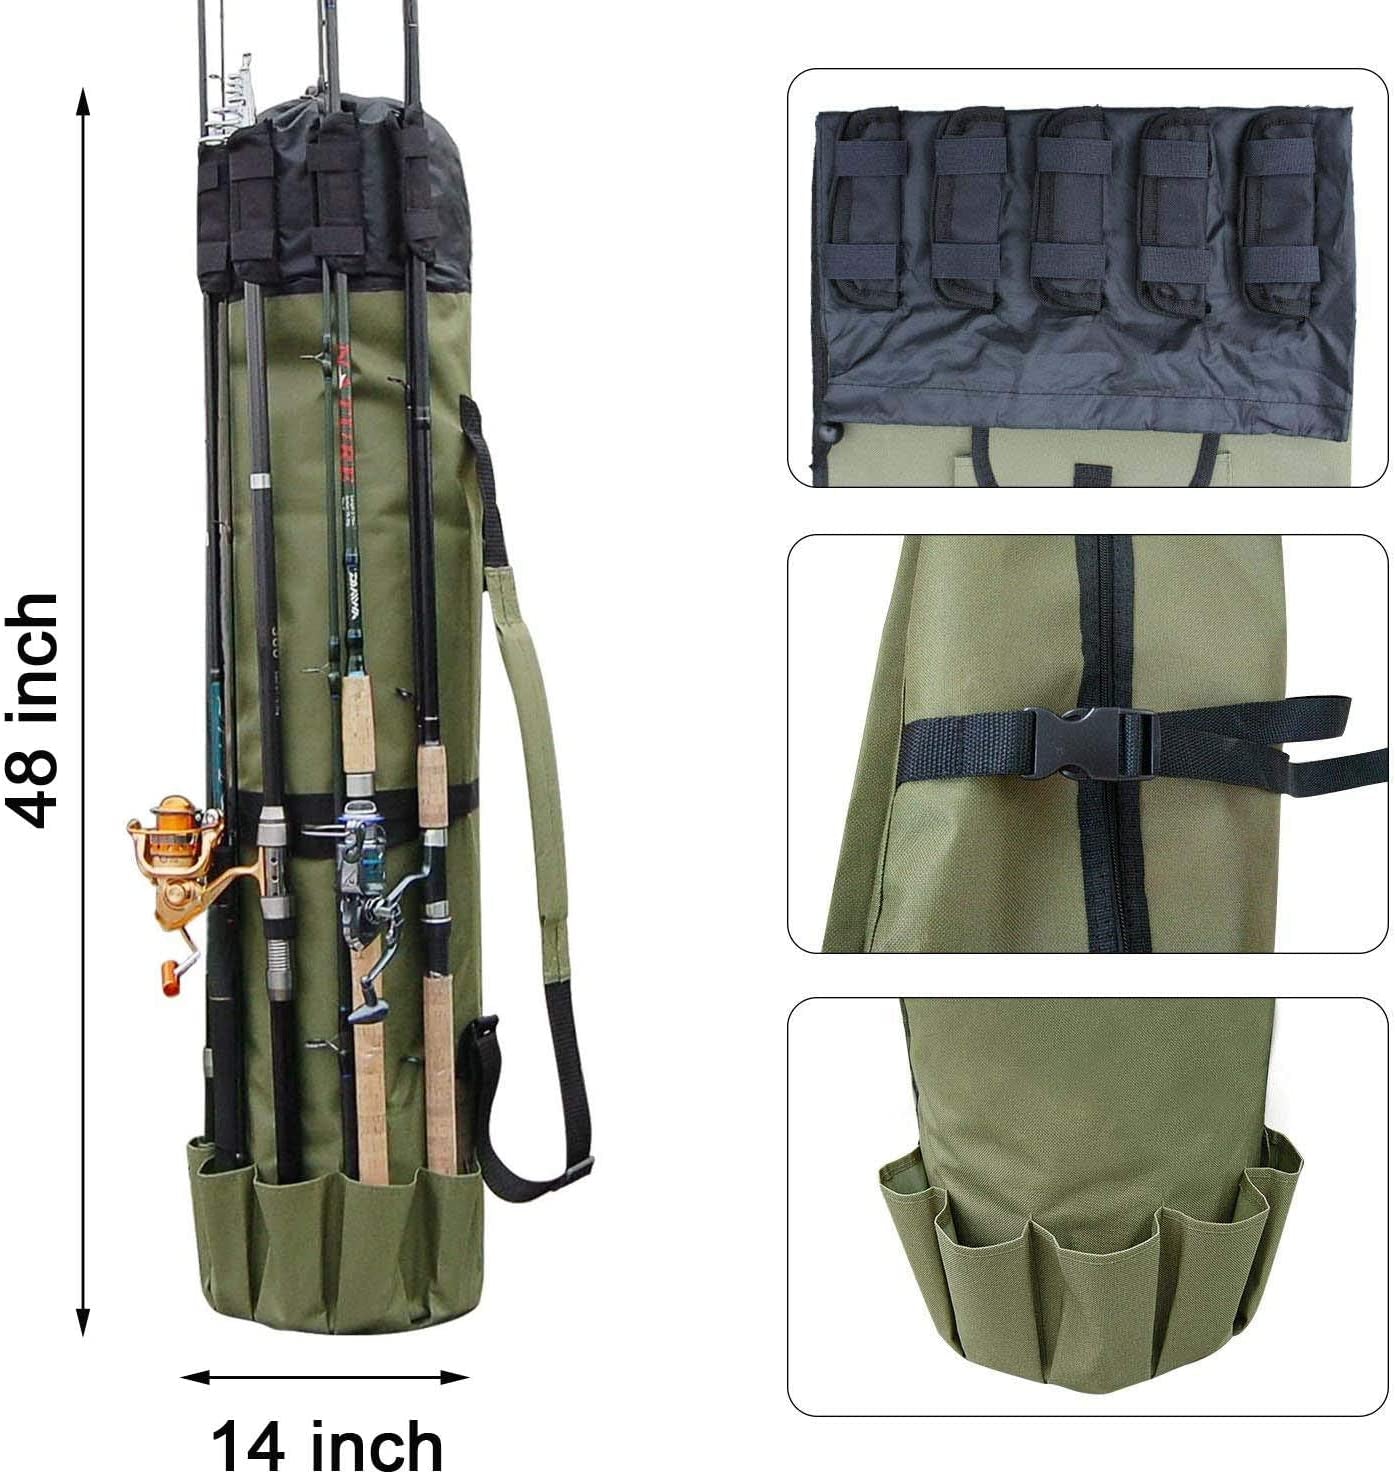 Fishing Pole Bag with Rod Holder Fishing Rod Bag Carrier Case 5 Poles Waterproof Travel Case Fishing Tackle Box Storage Bag Durable Fishing Gear Organizer Fishing Gift for Men